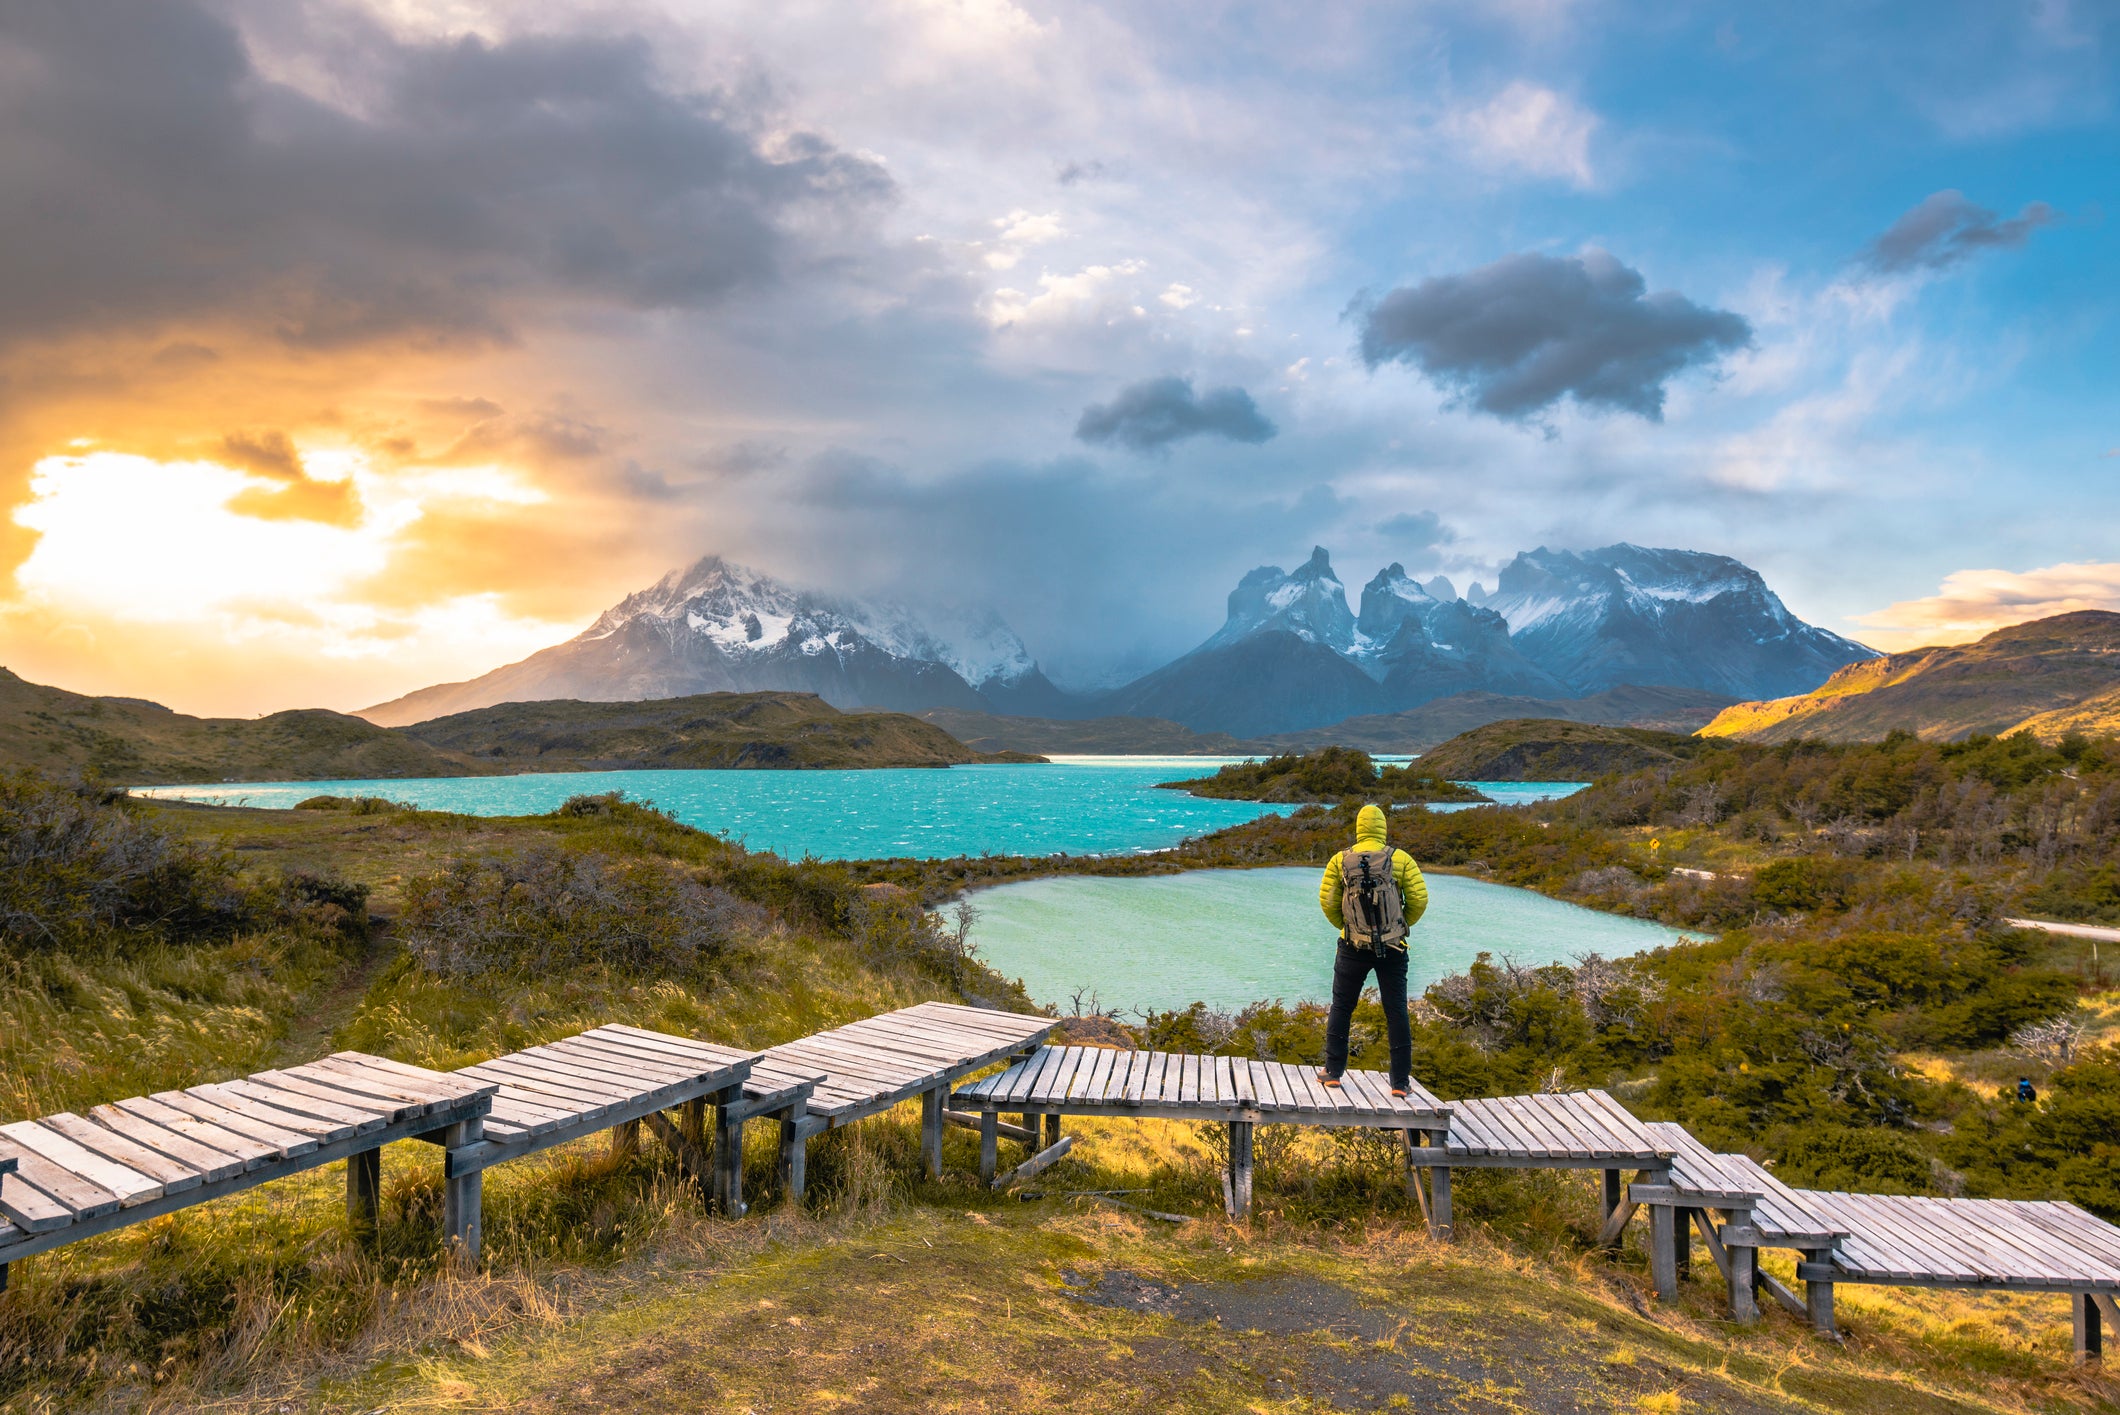 Tourist admiring the lake Pehoe and Torres del Paine range at sunset, Chile